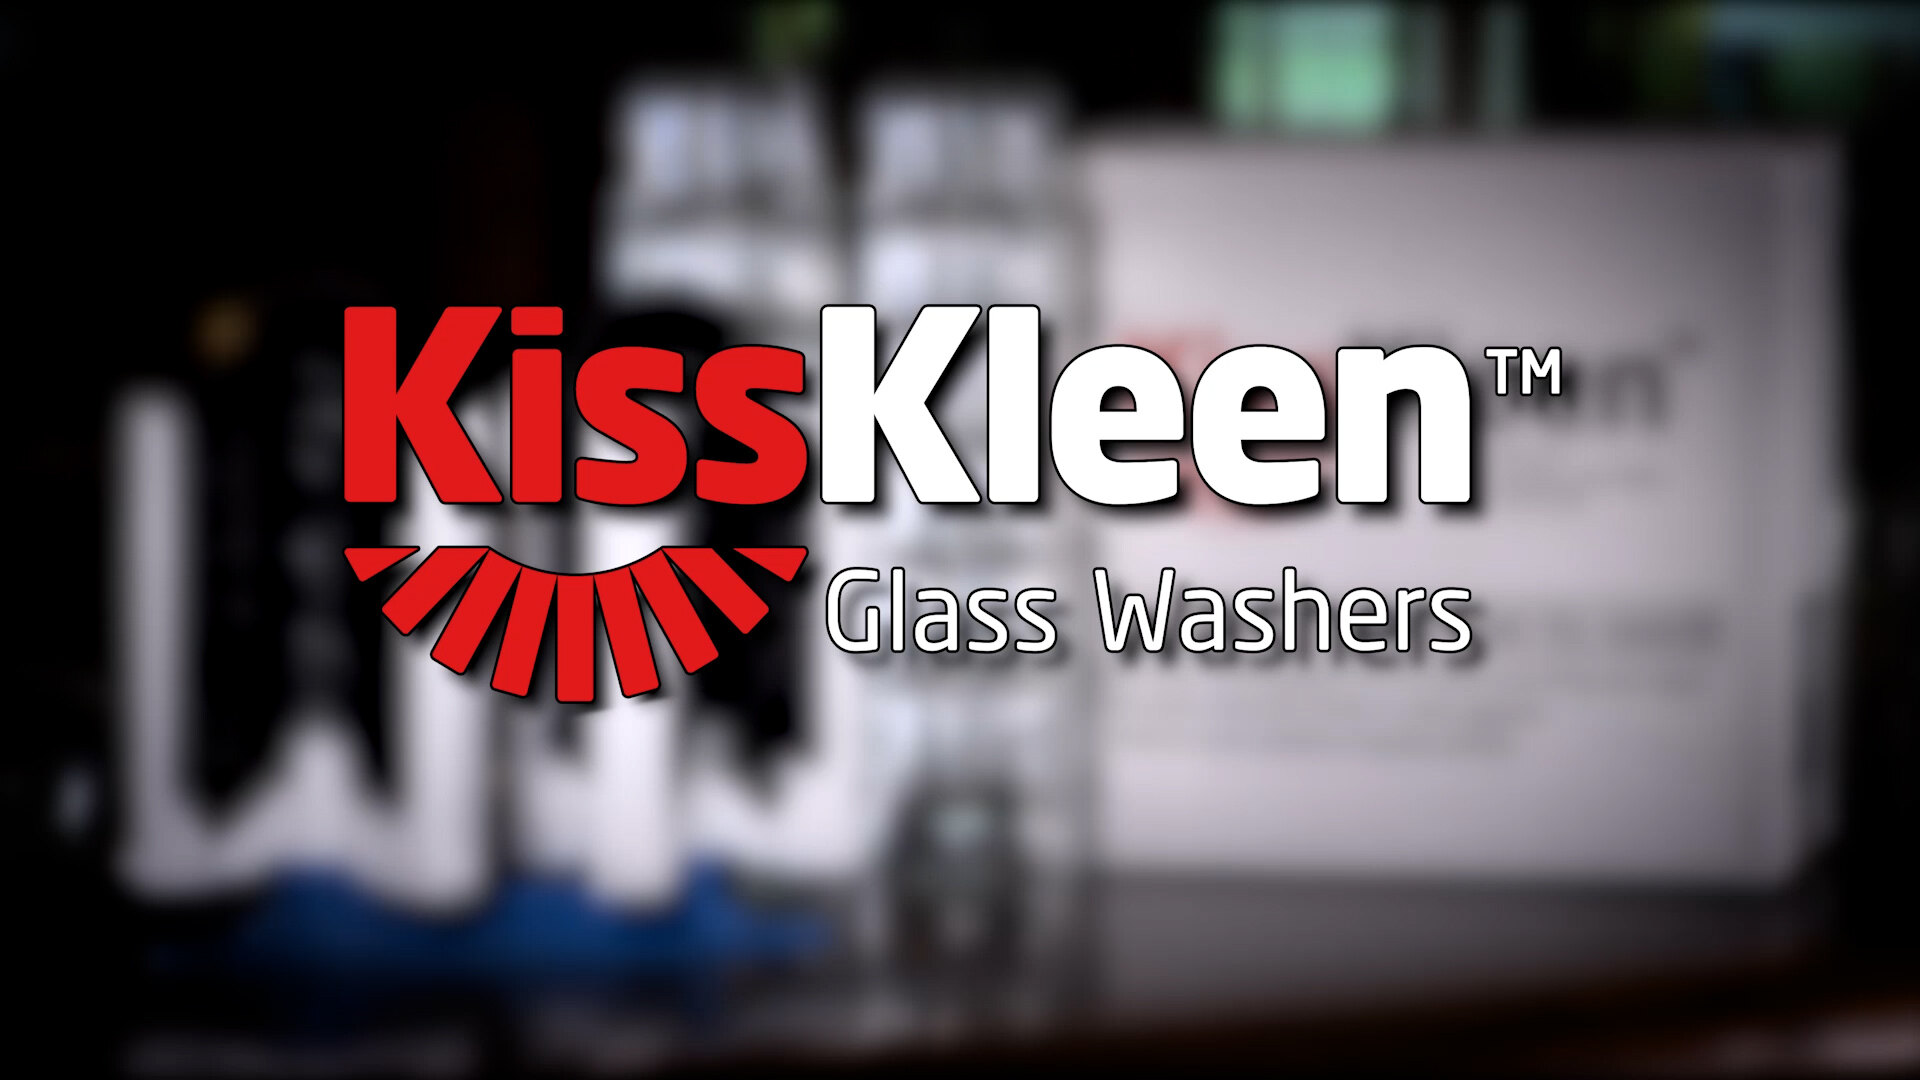 KissKleen KGW-0813 Manual Glass Washer with 8 Brushes